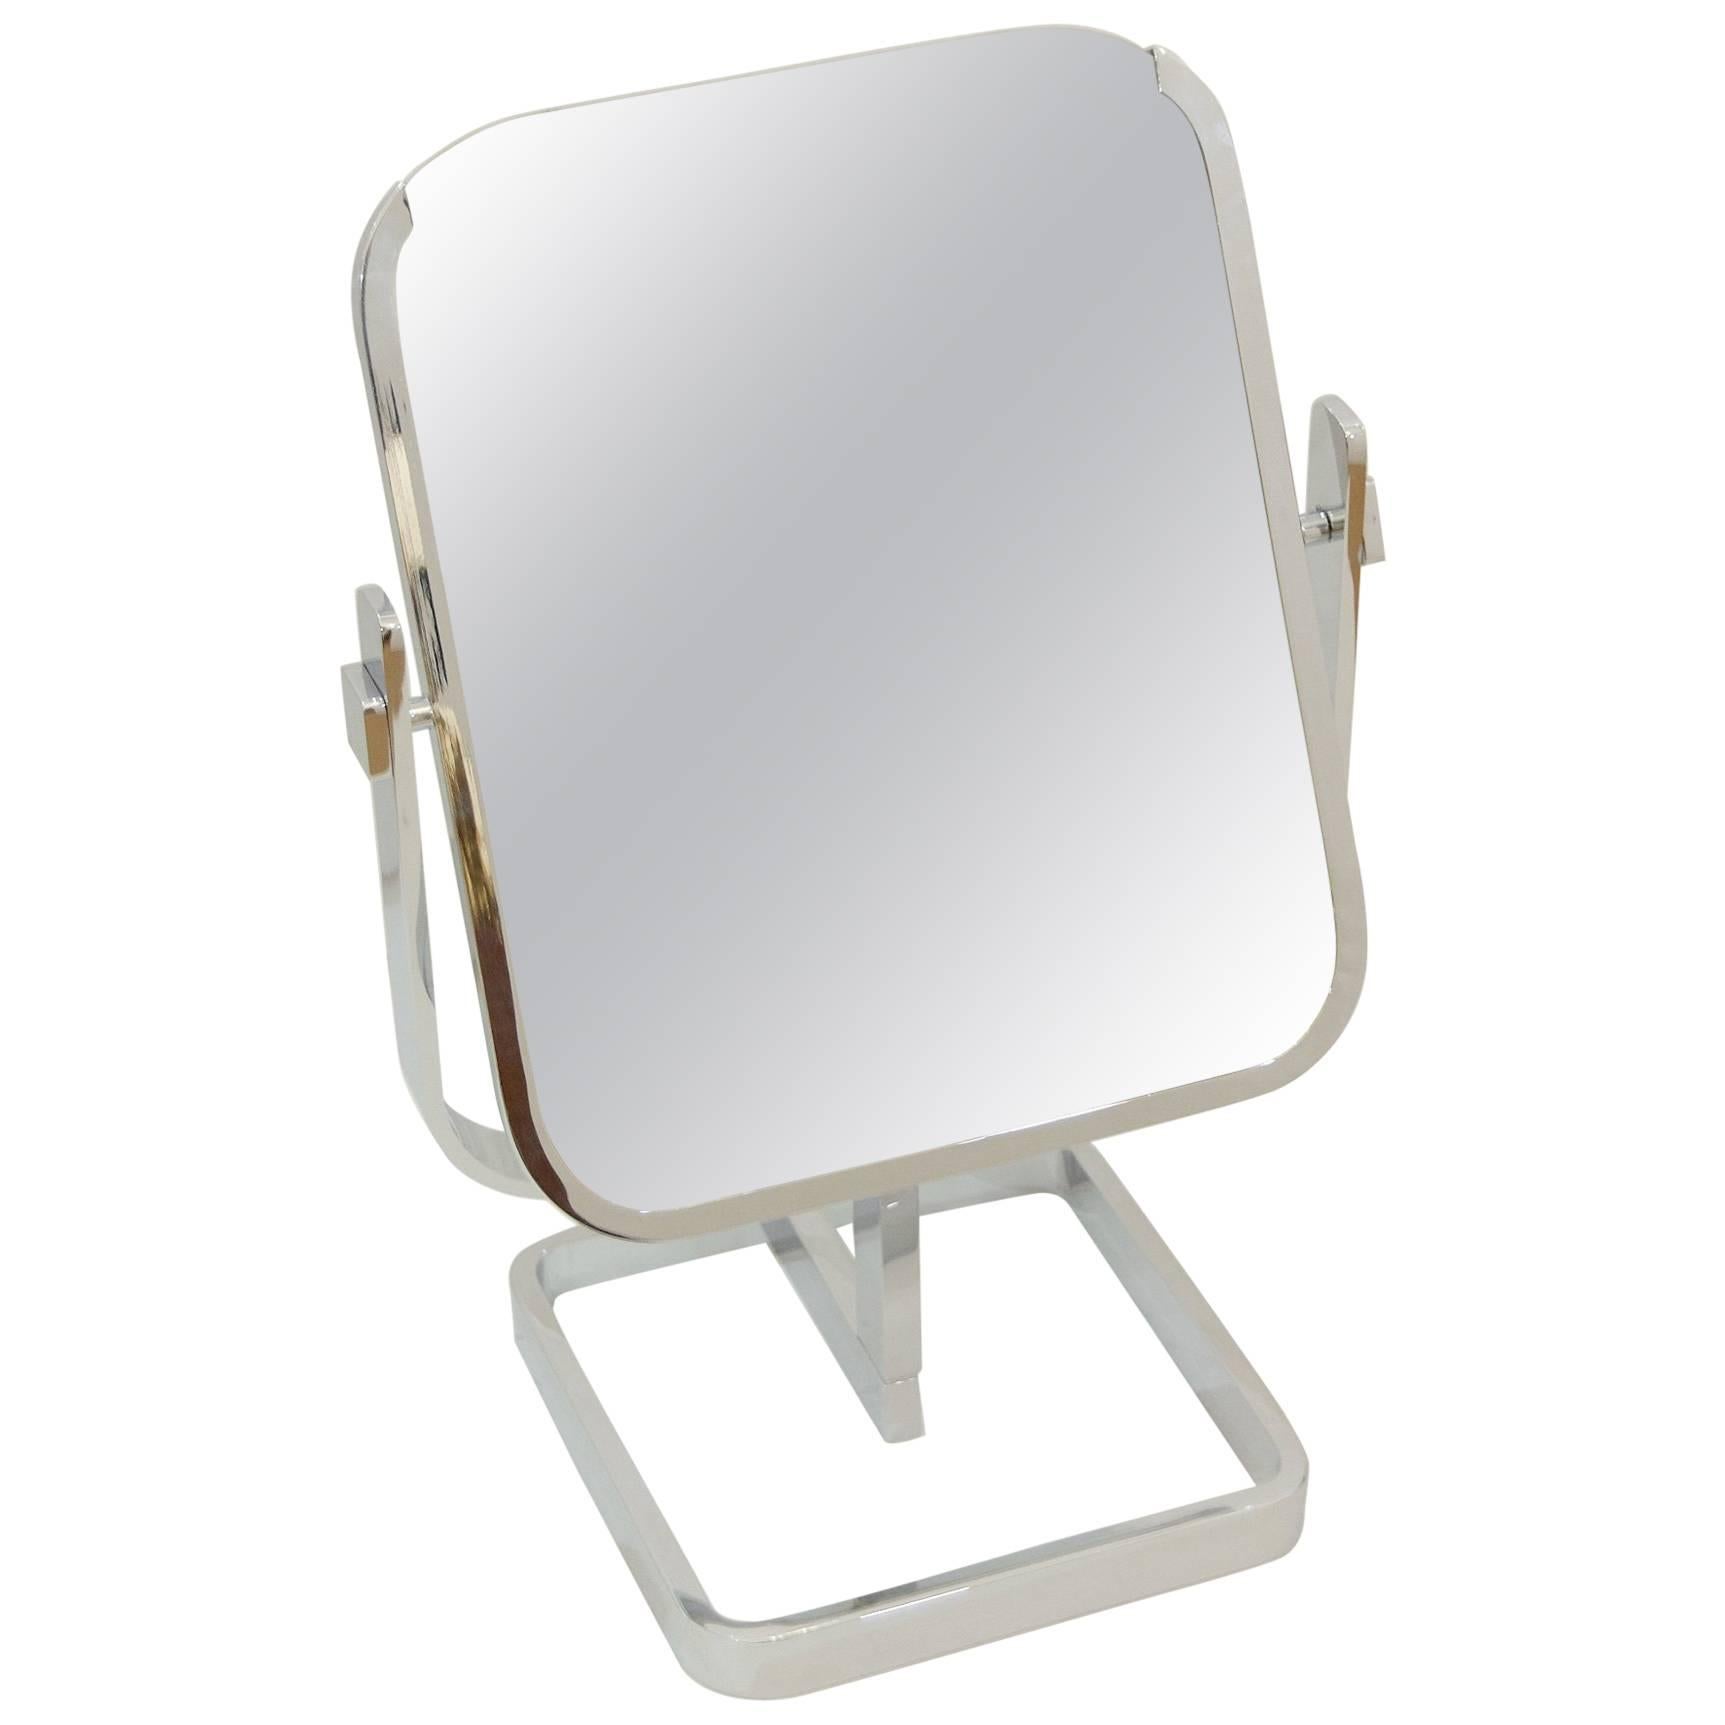 Double-Sided Chrome Vanity Mirror